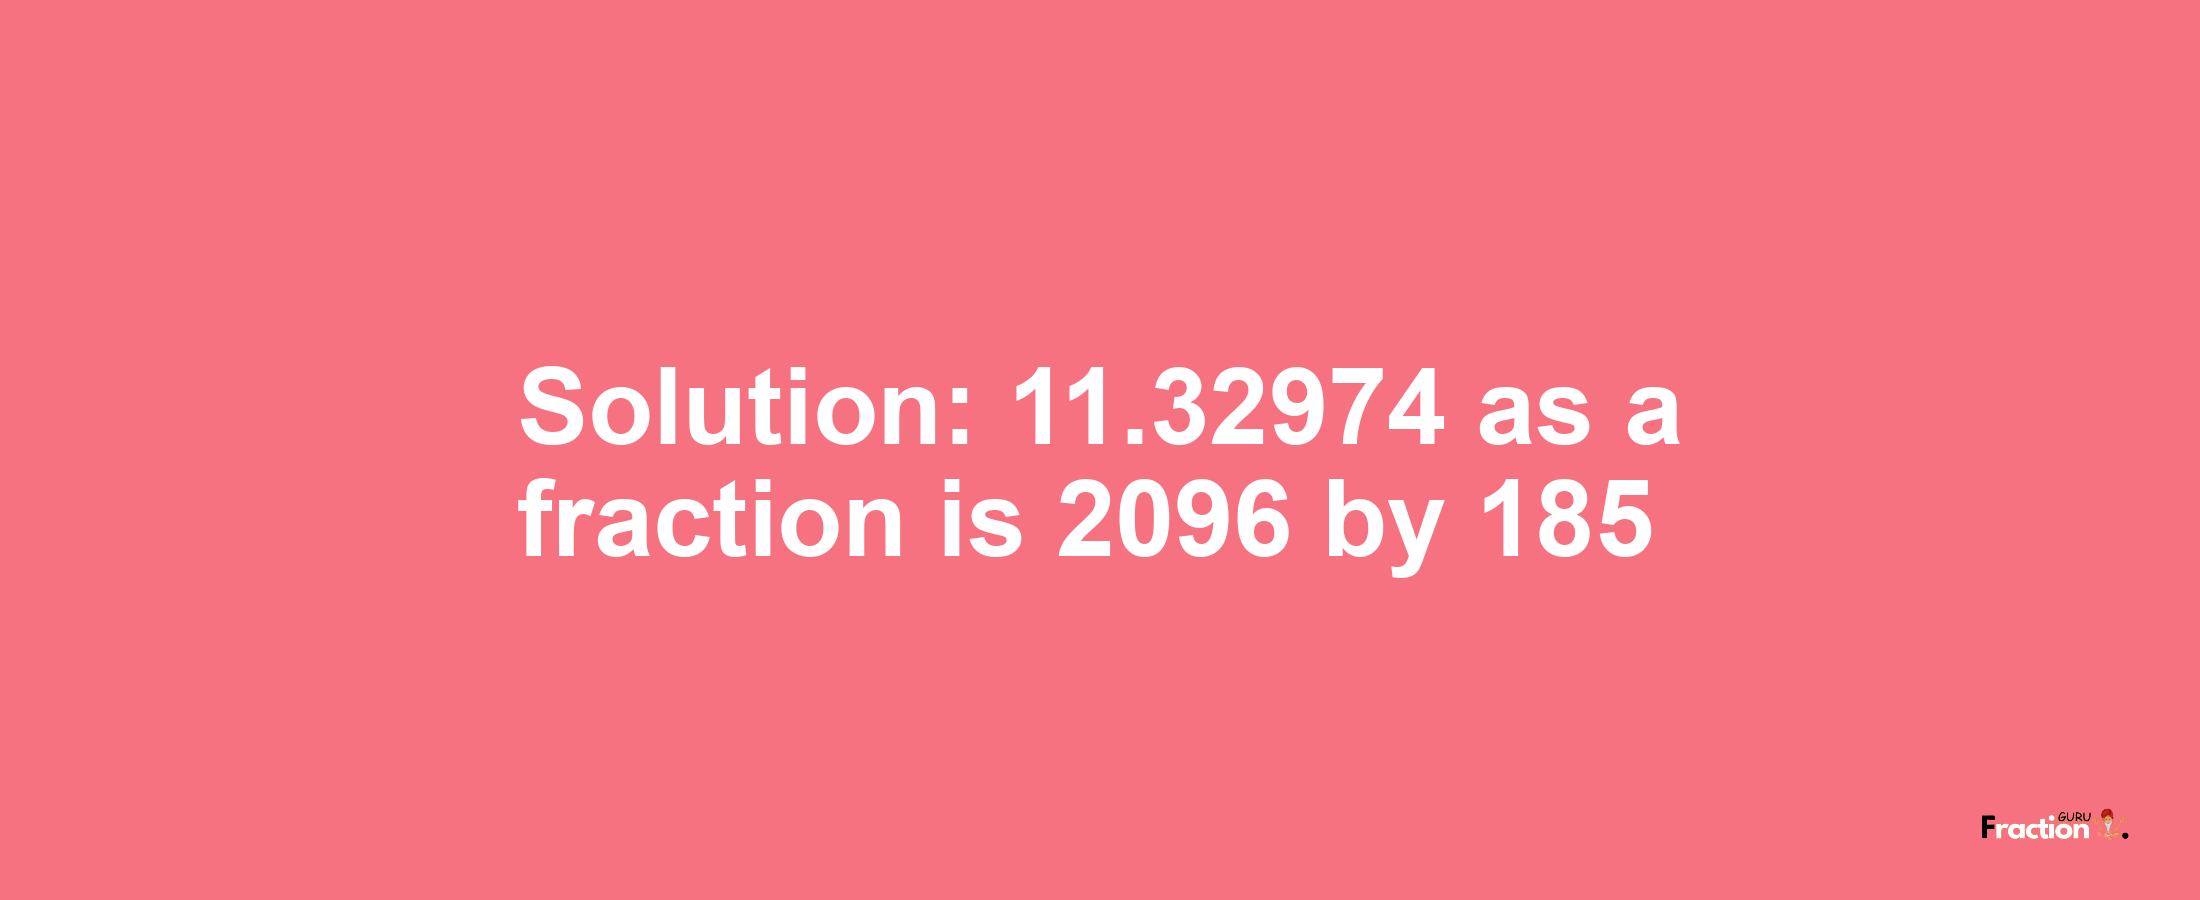 Solution:11.32974 as a fraction is 2096/185